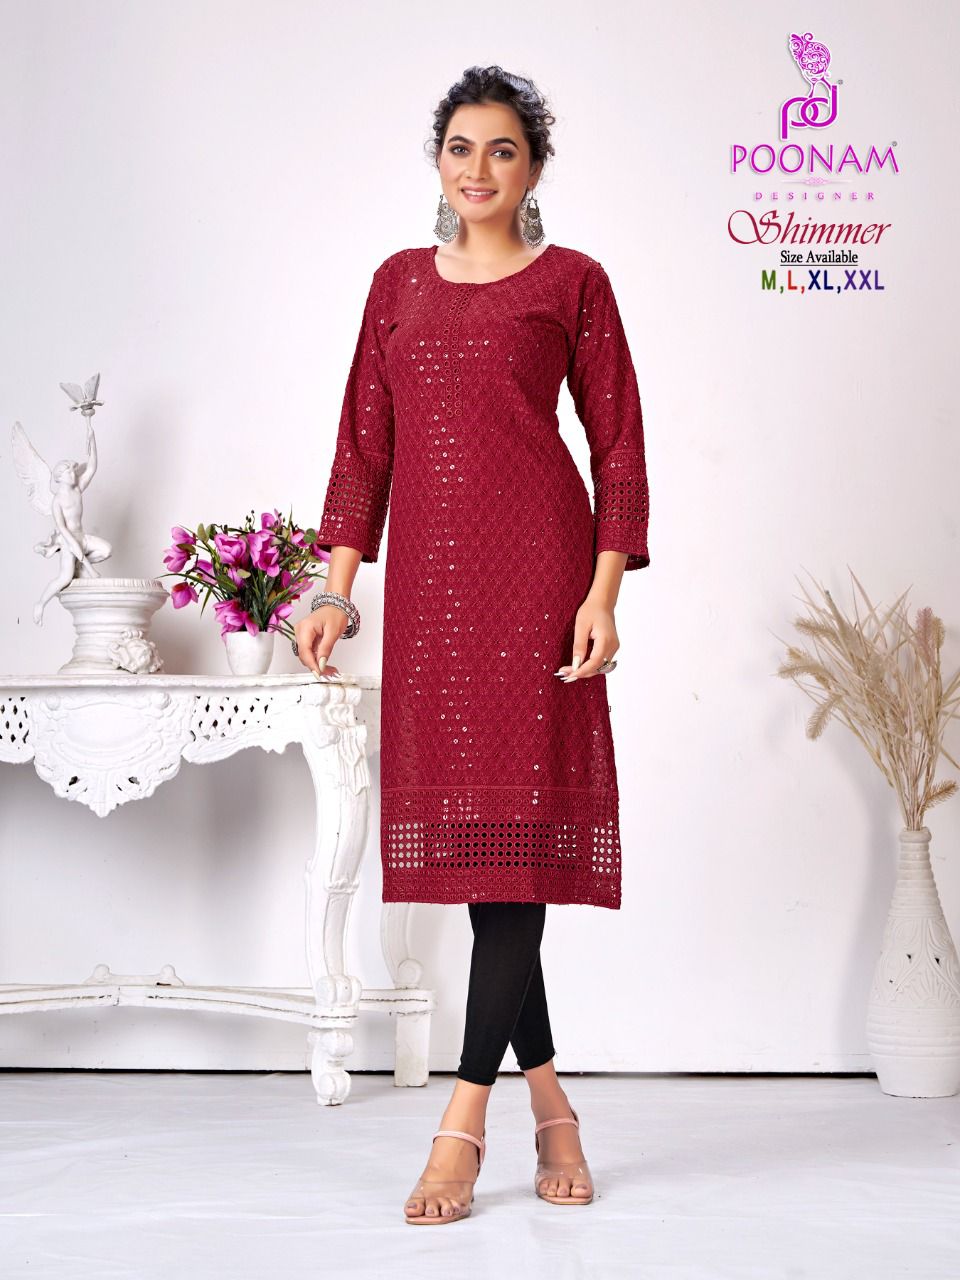 Poonam Shimmer collection 6